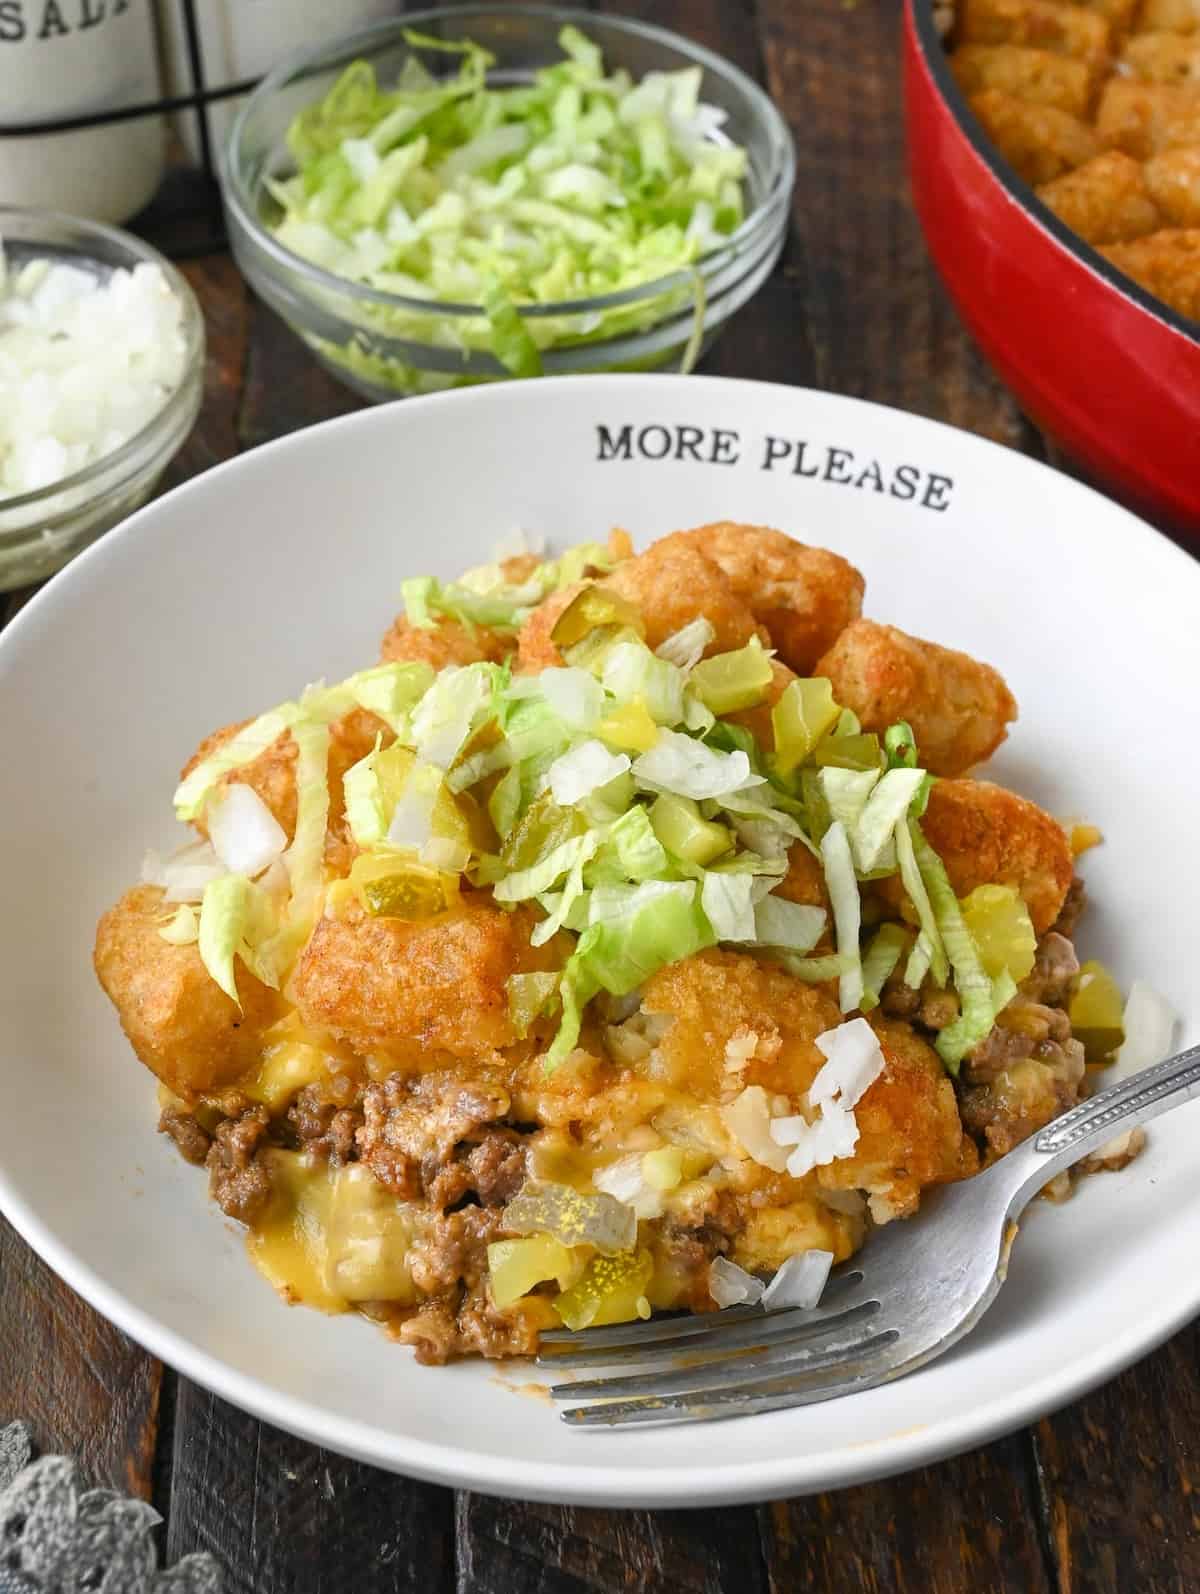 Big mac casserole in a plate with shredded lettuce and diced pickles on top.